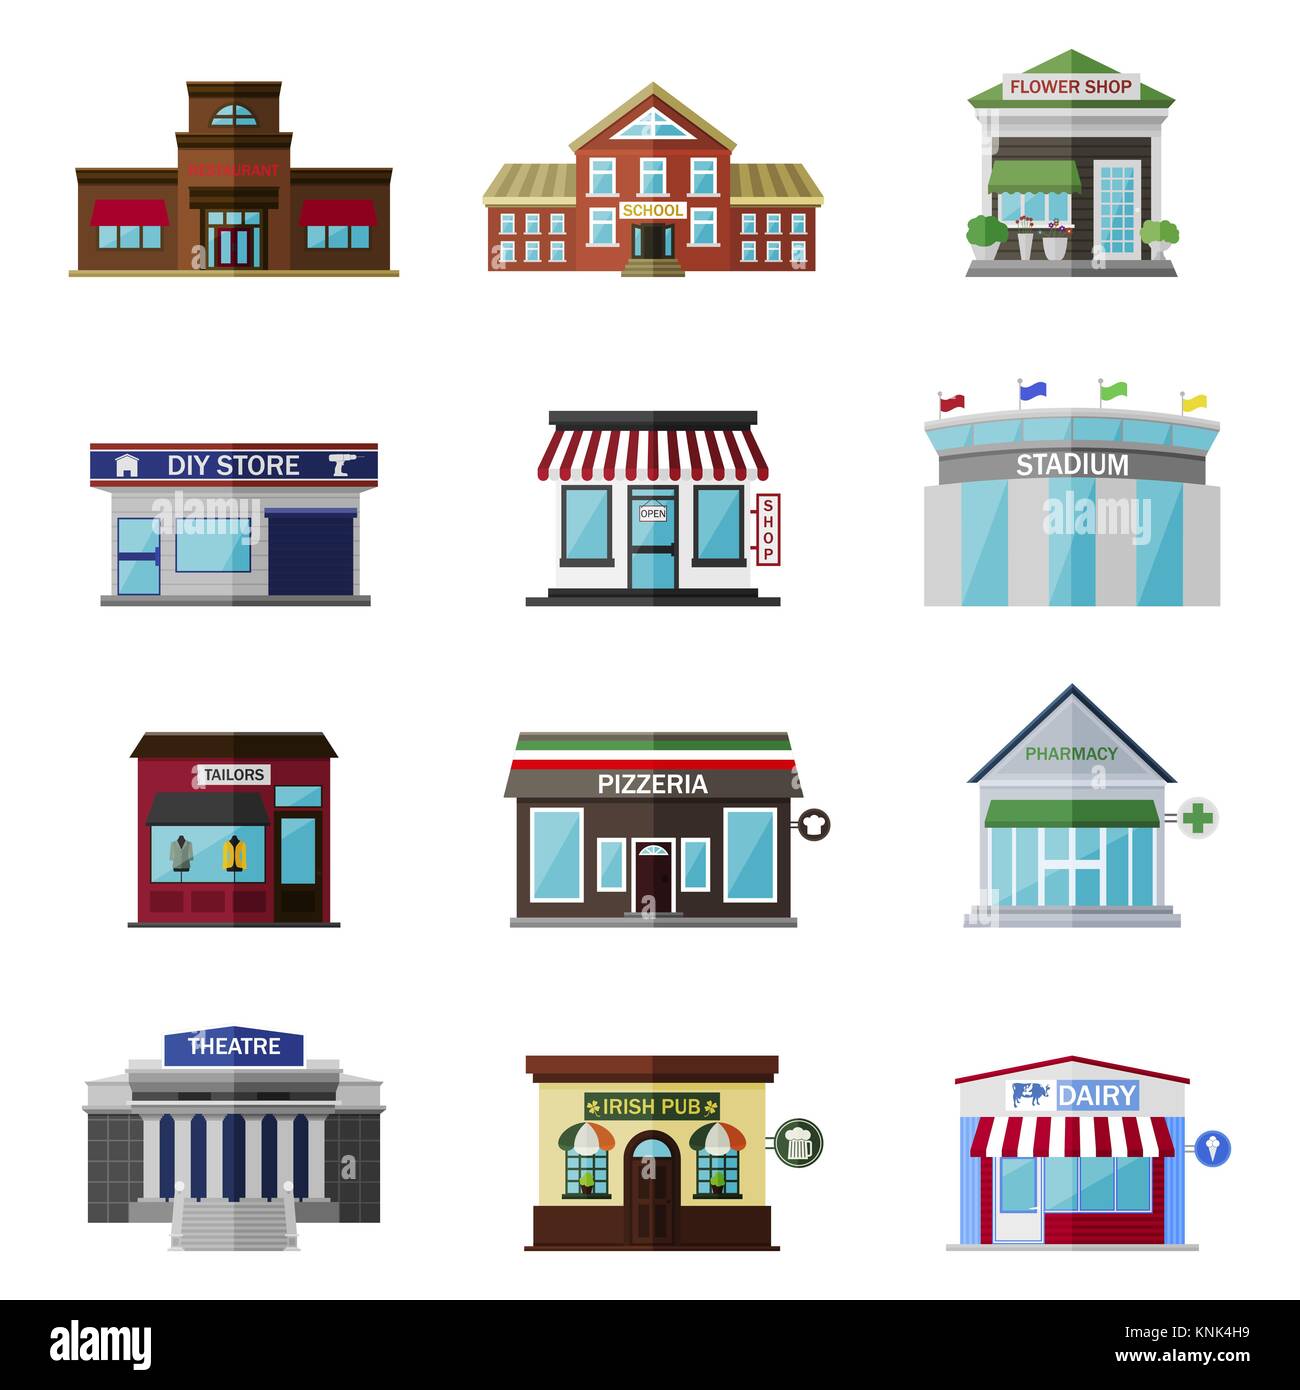 Different shops, buildings and stores flat icon set isolated on white. Includes restaurant, school, flower shop, shop, diy store, stadium, tailors, pizzeria, pharmacy, theatre, irish pub, dairy Stock Vector